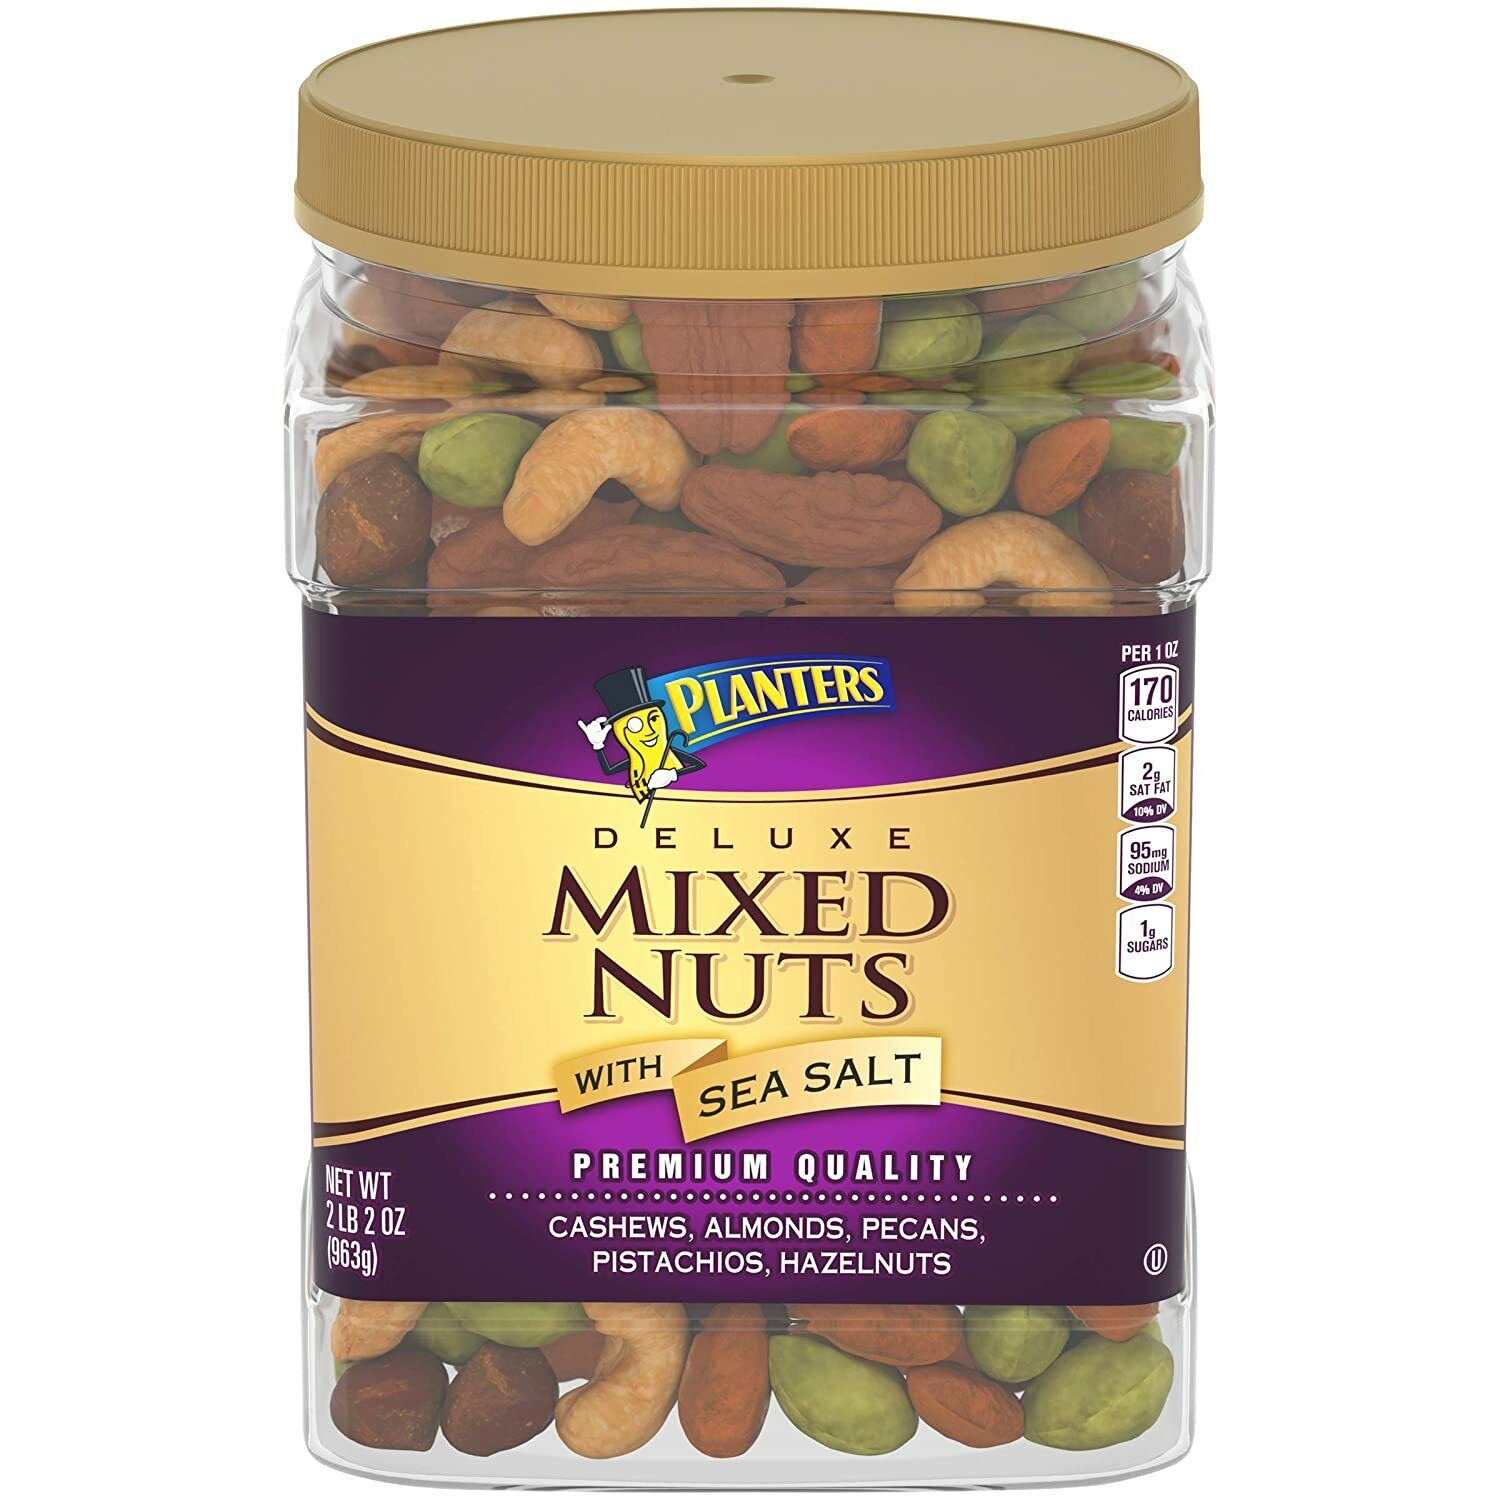 Planters Deluxe Salted Mixed Nuts with Sea Salt, Cashew, Almonds, Pecan etc 2lbs